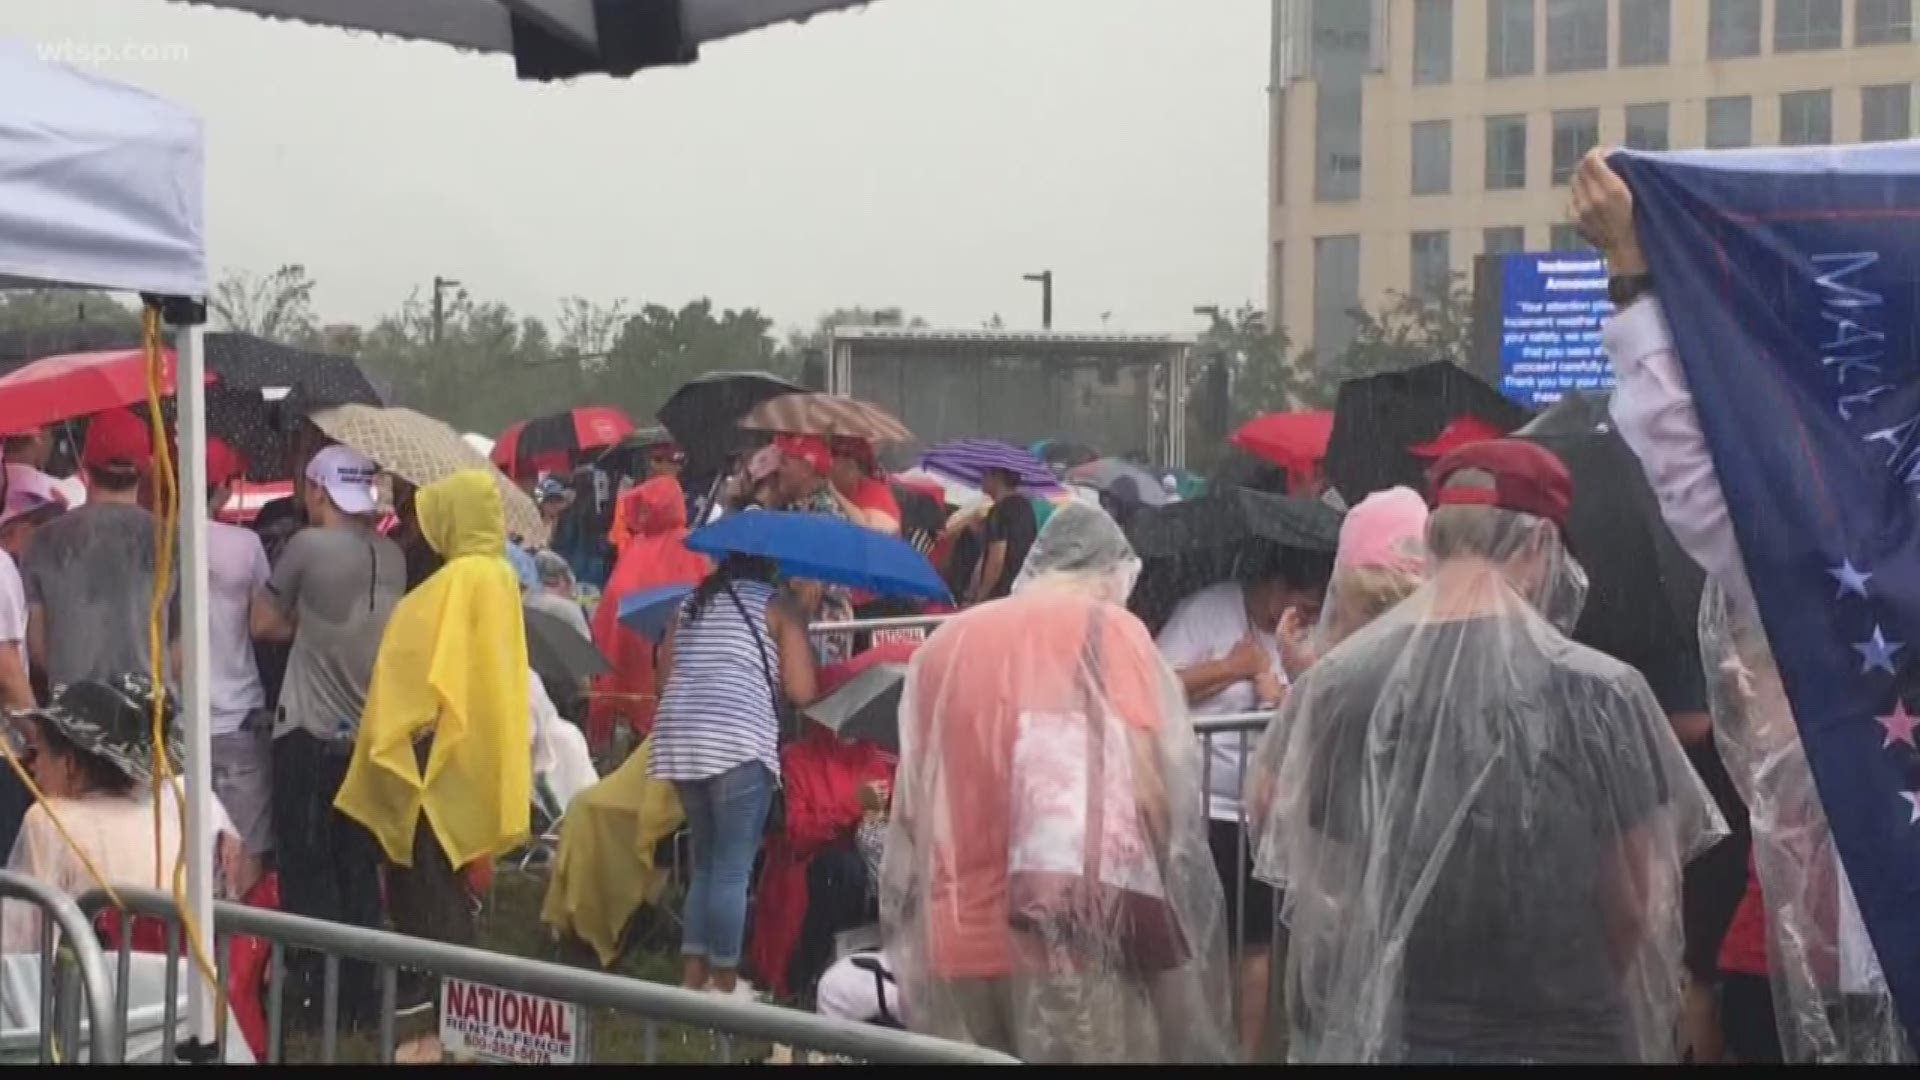 President Donald Trump supporters waited through rain and scorching heat before getting inside his Orlando rally. Florida residents came from all over the state to hear the president make an announcement for a 2020 run.